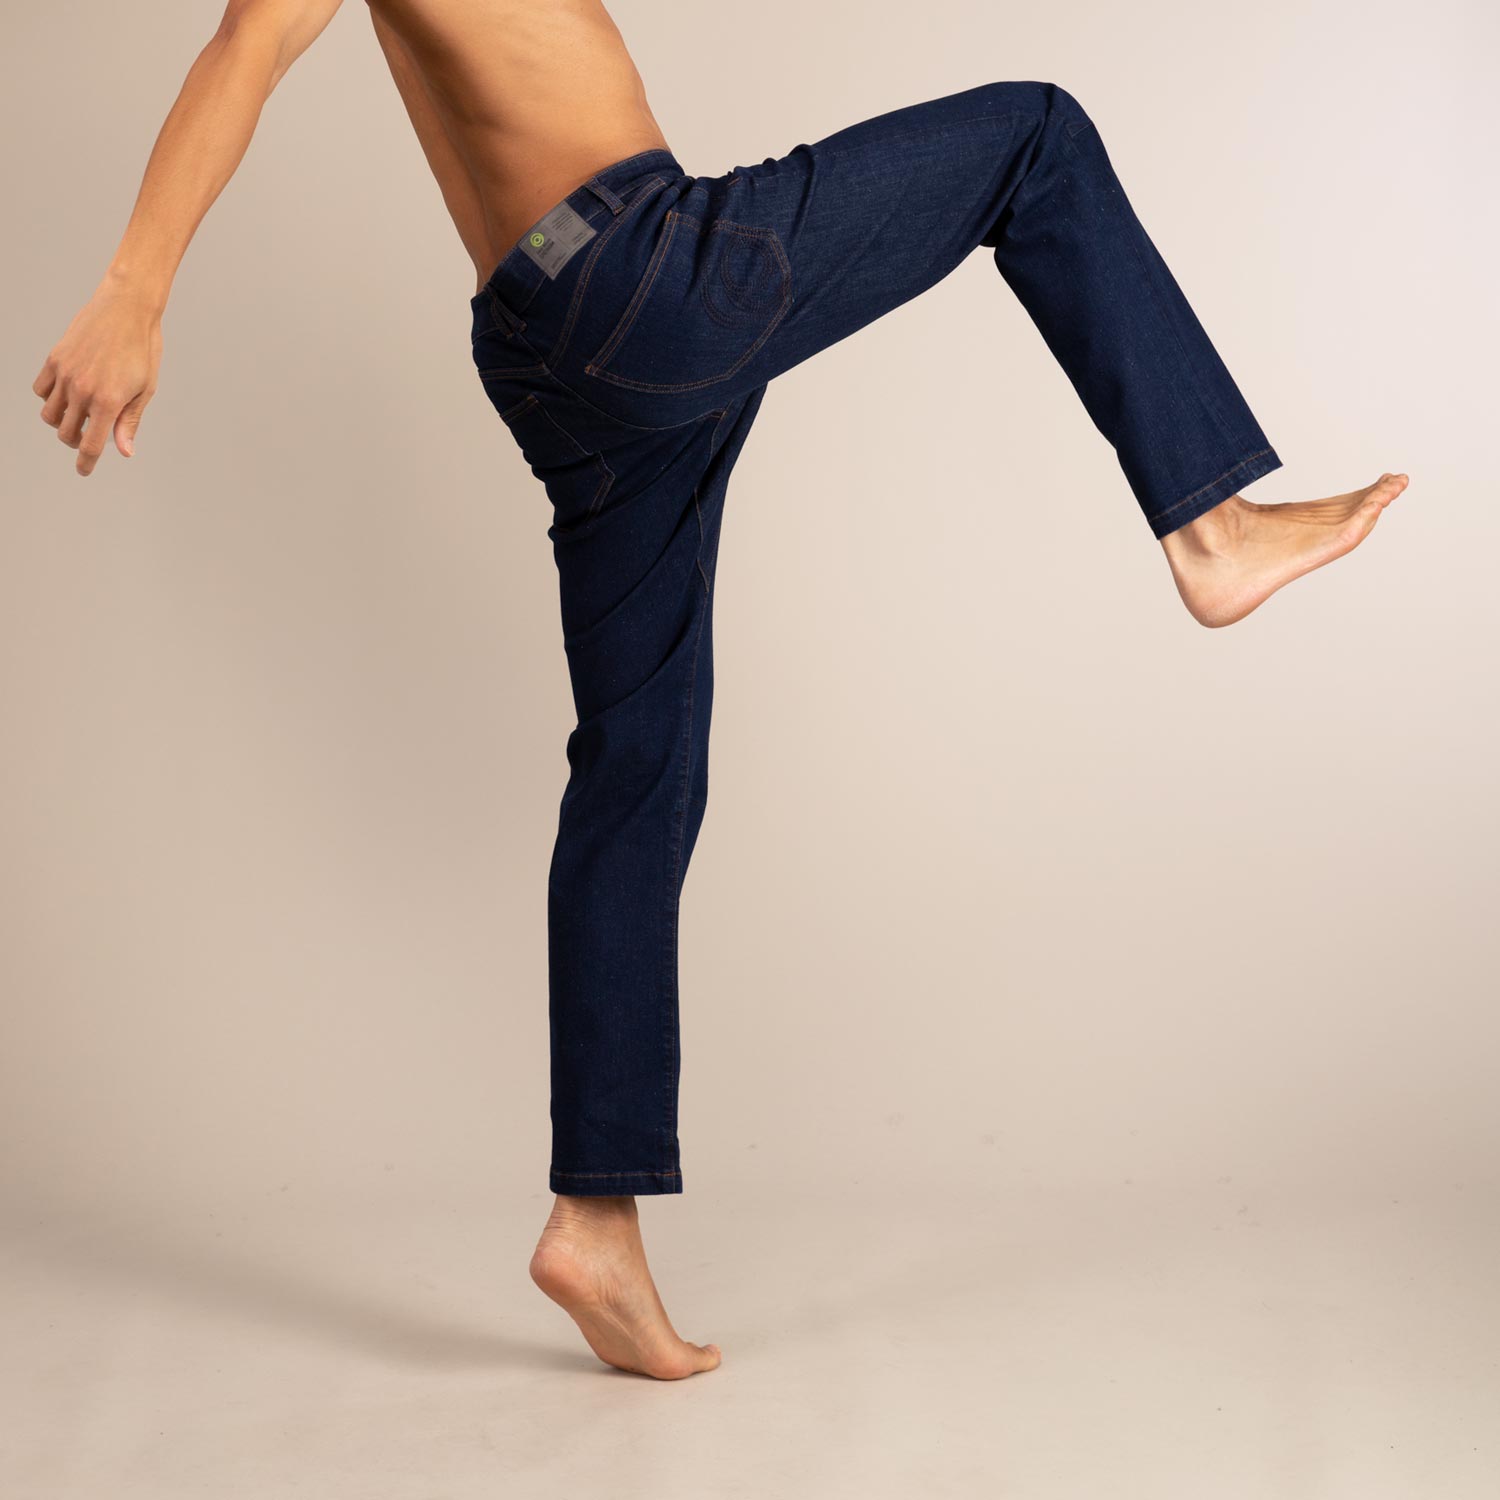 MARS JEANS | Organic Ultimate Movement Jeans | 3RD ROCK Clothing - Donald is 6ft 1 with a 29" waist, 36" hips and wears a 30/LL, but can also wear a 28" waist for a slimmer fit. M